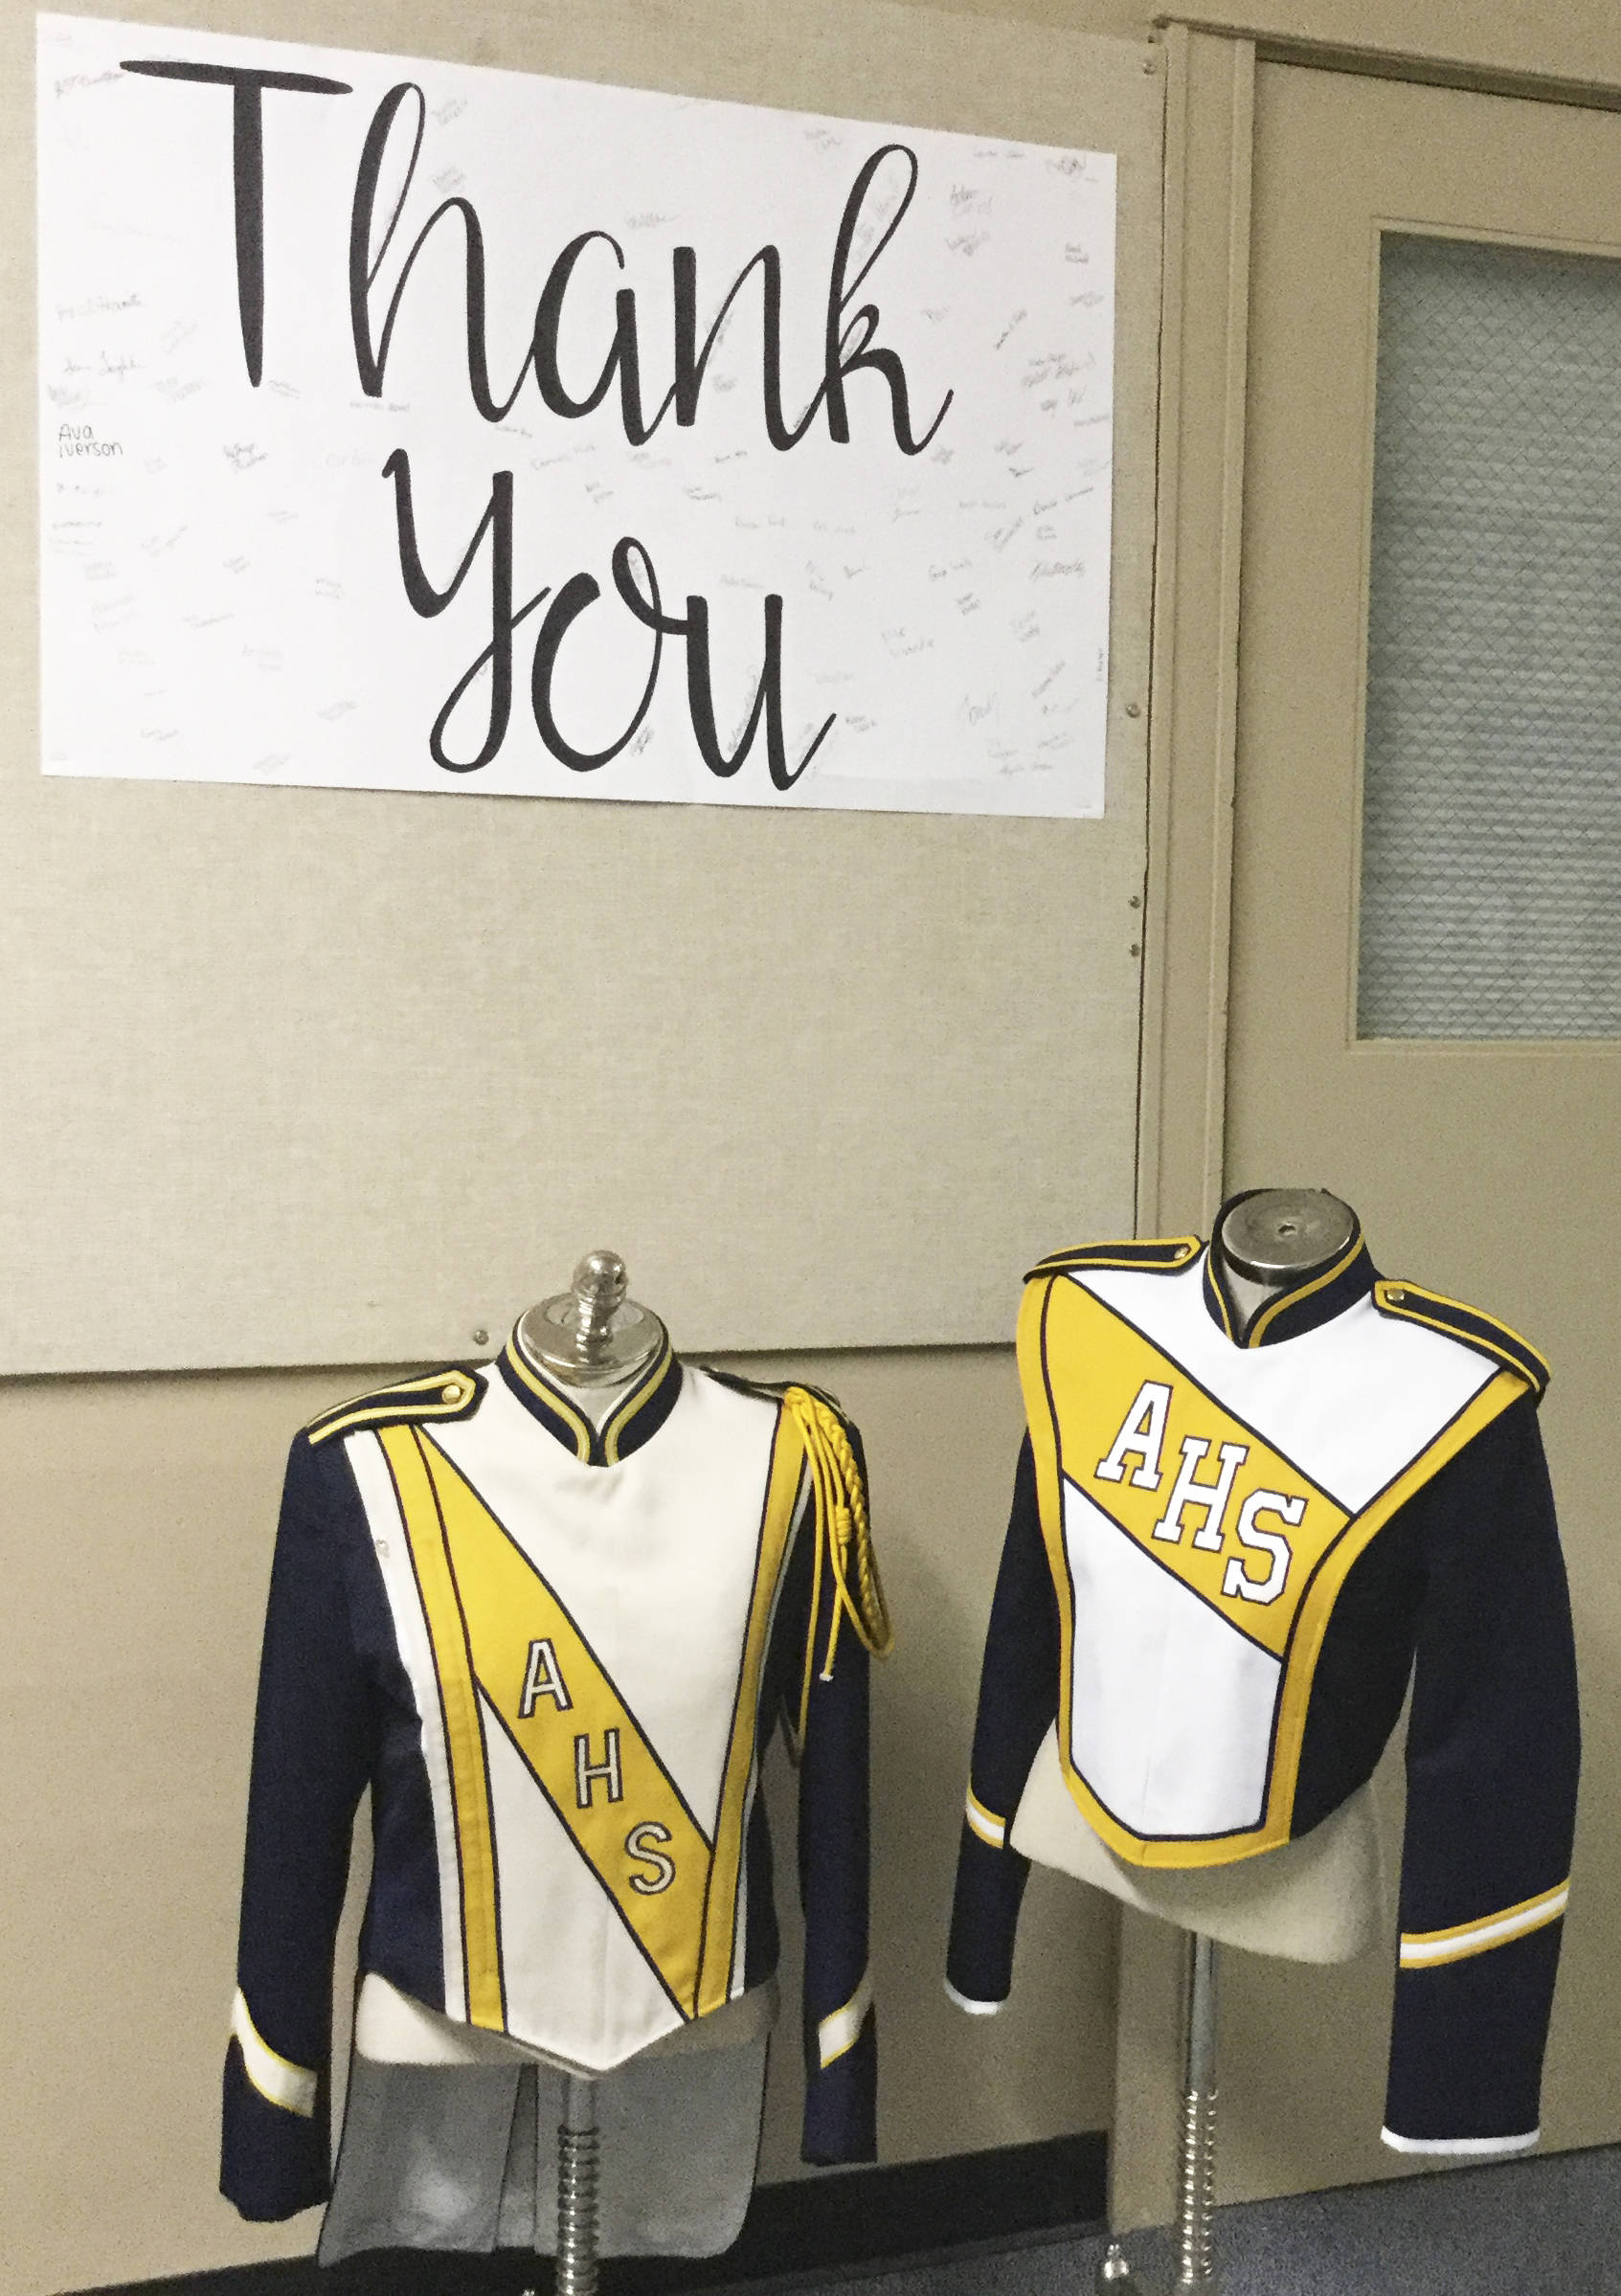 AHS marching band scores big with arrival of new uniforms